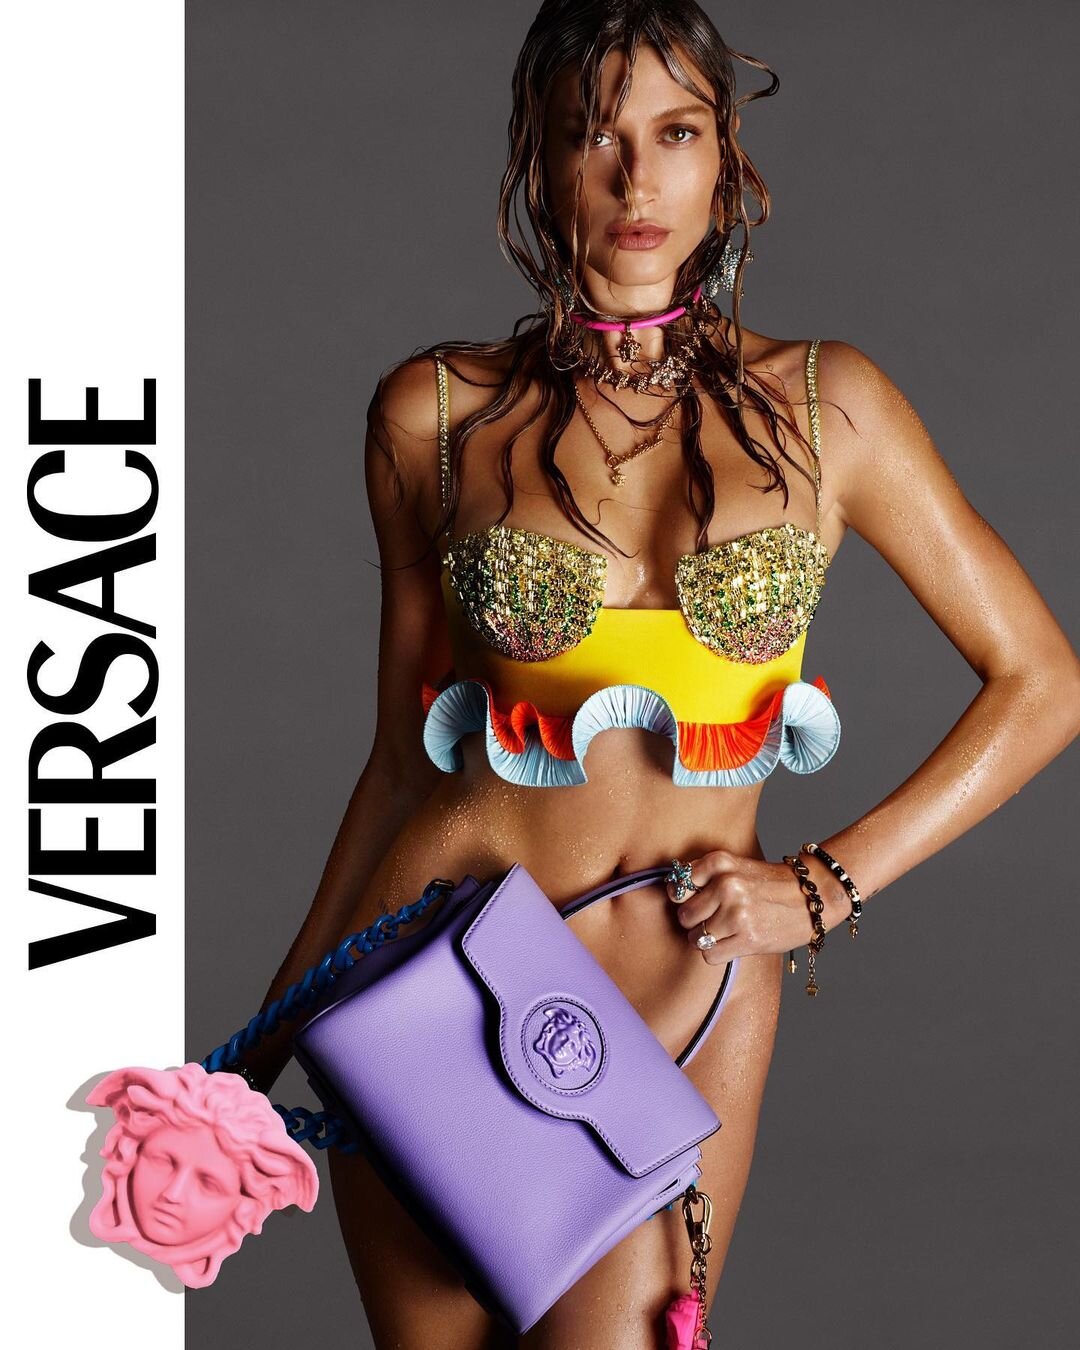 Precious Lee channels Medusa in Versace's new campaign